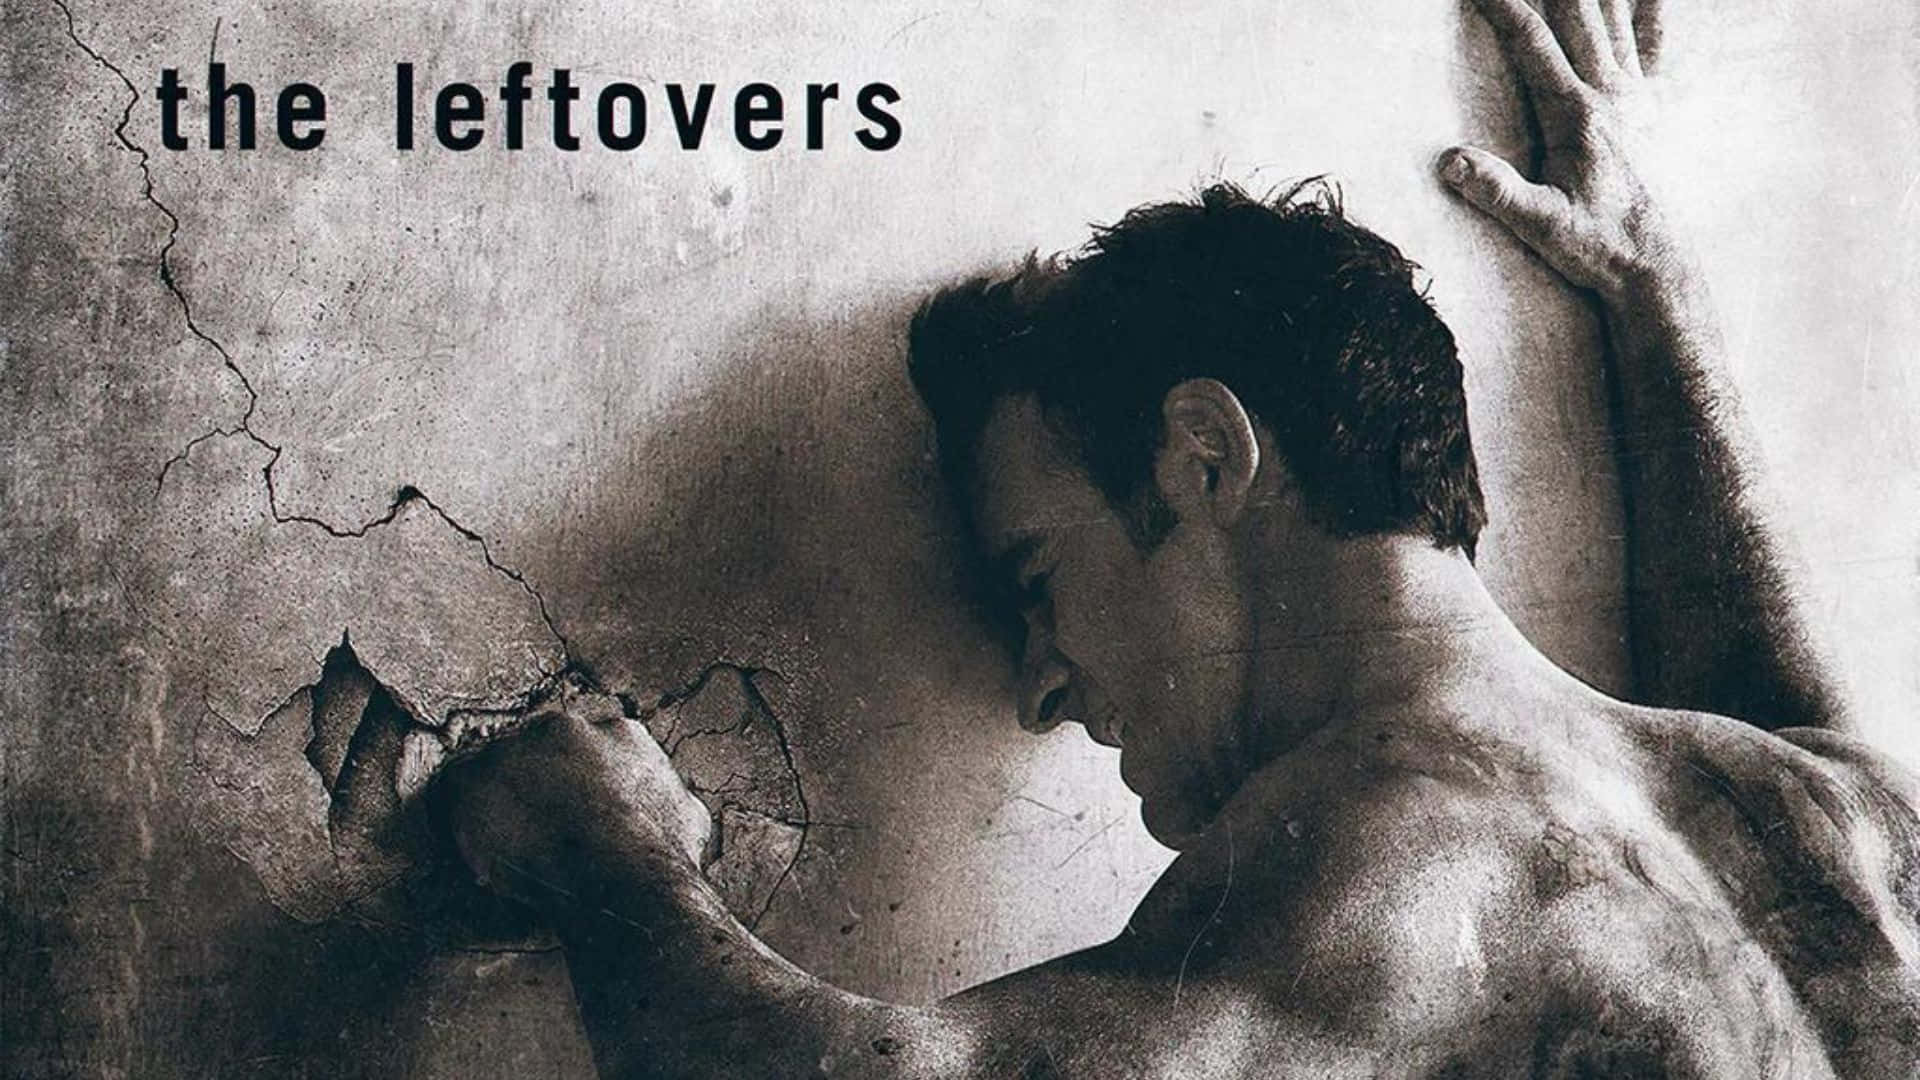 The Leftovers Series Promotional Art Wallpaper